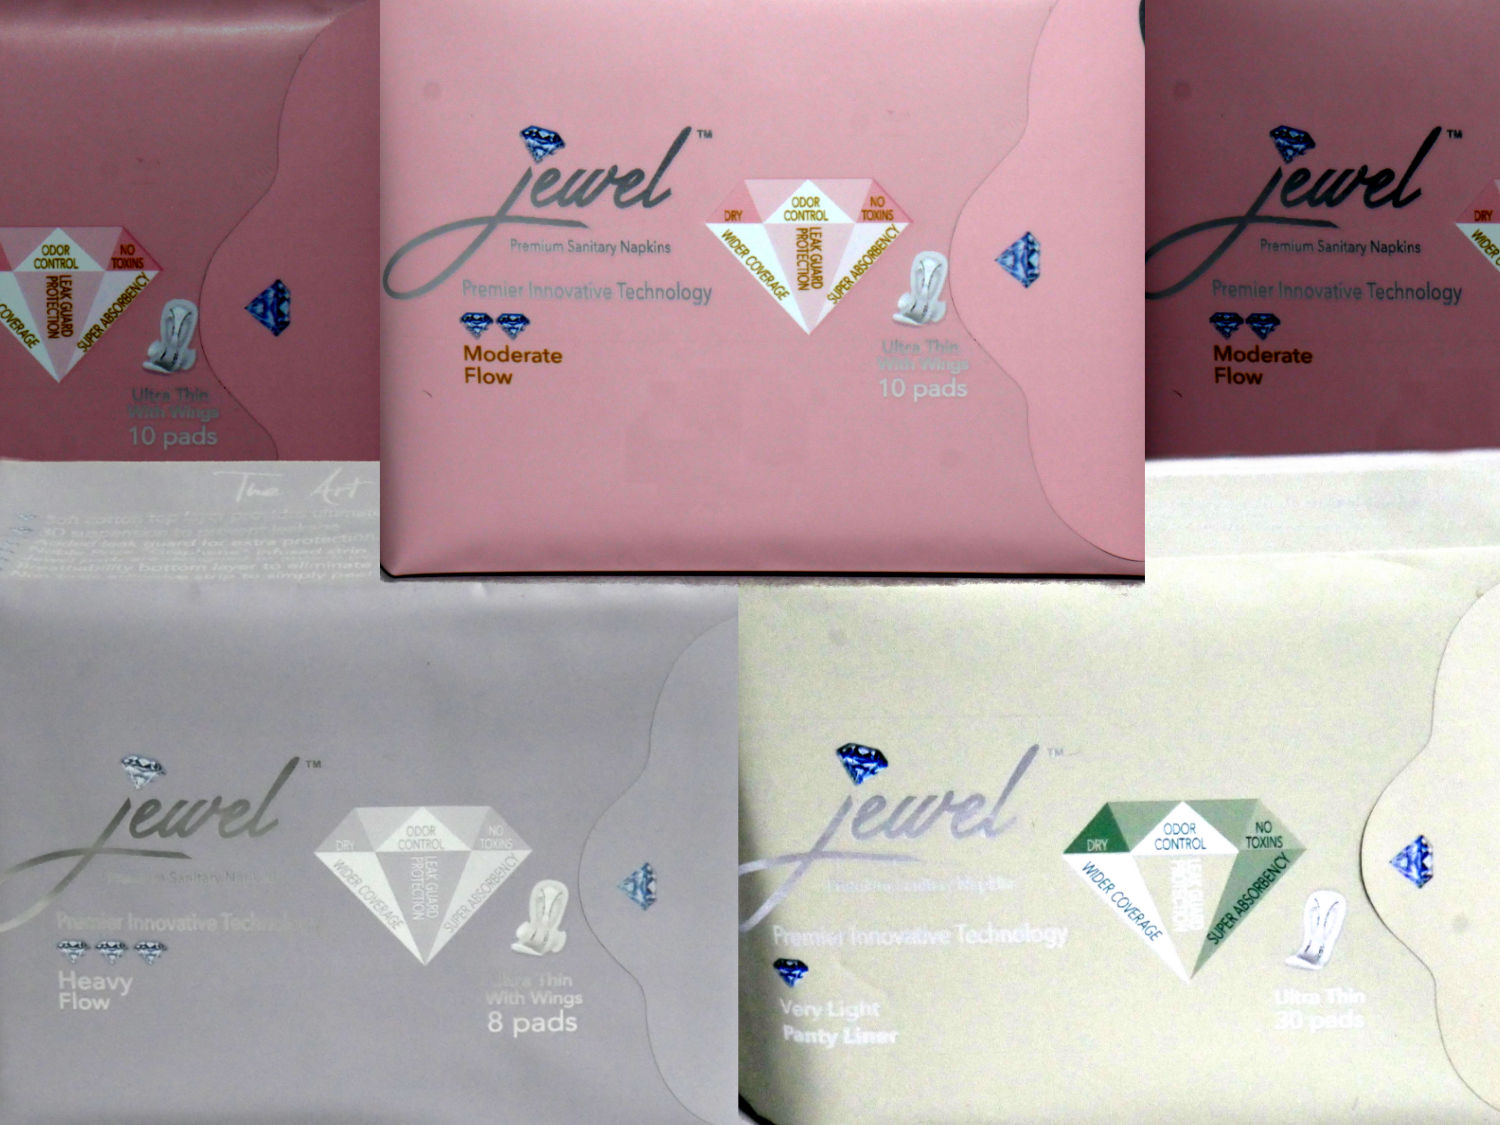 ​JEWEL PADS: TRIO PACK
3 PACKS: 1 PACK OF PANTY LINERS, 1 DAY PACK, 1 NIGHT PACK